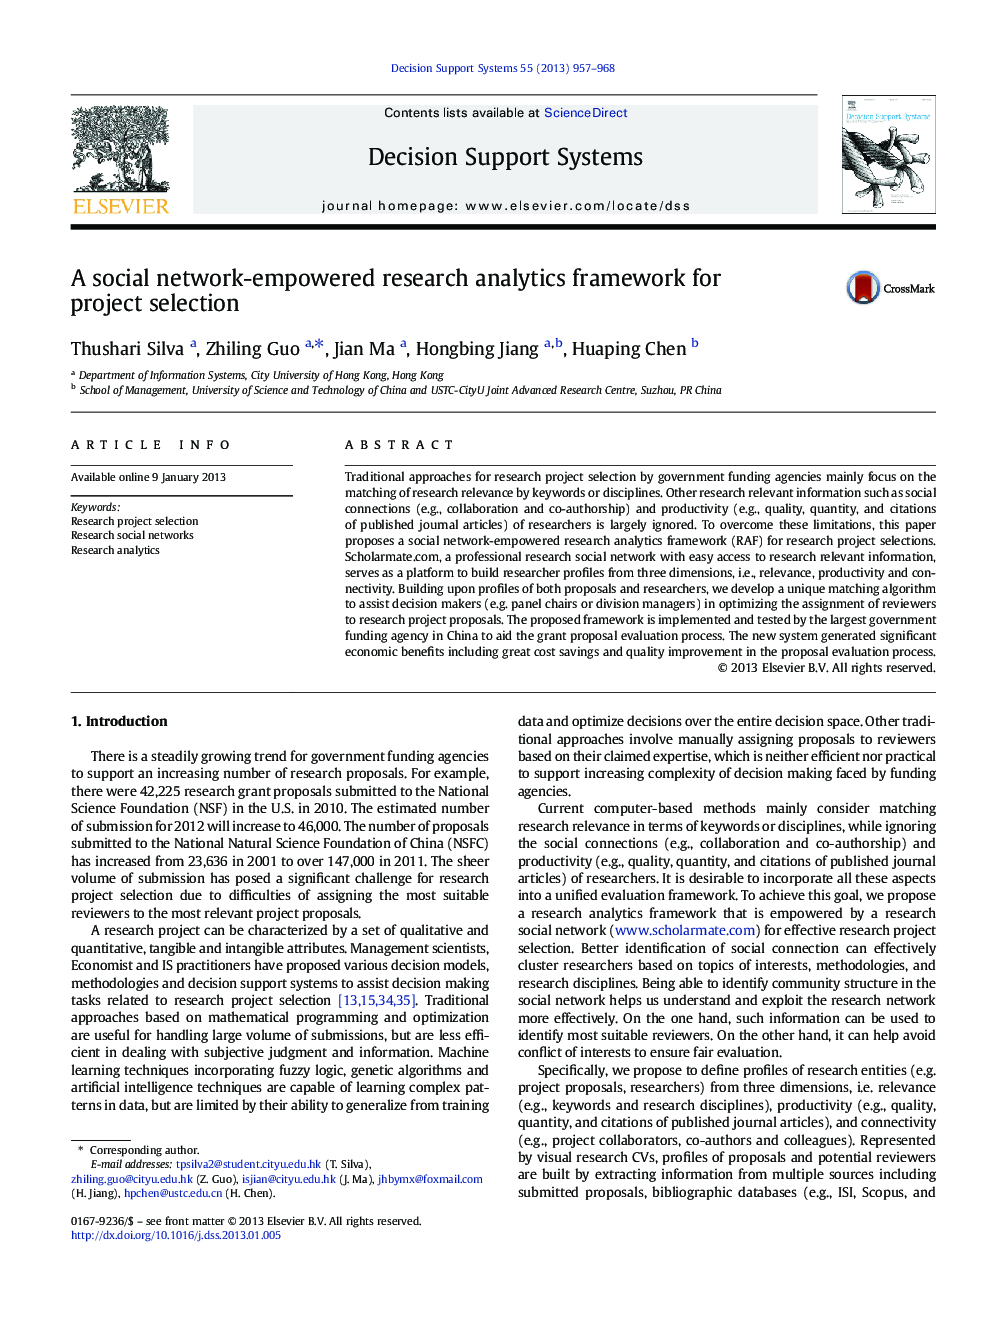 A social network-empowered research analytics framework for project selection